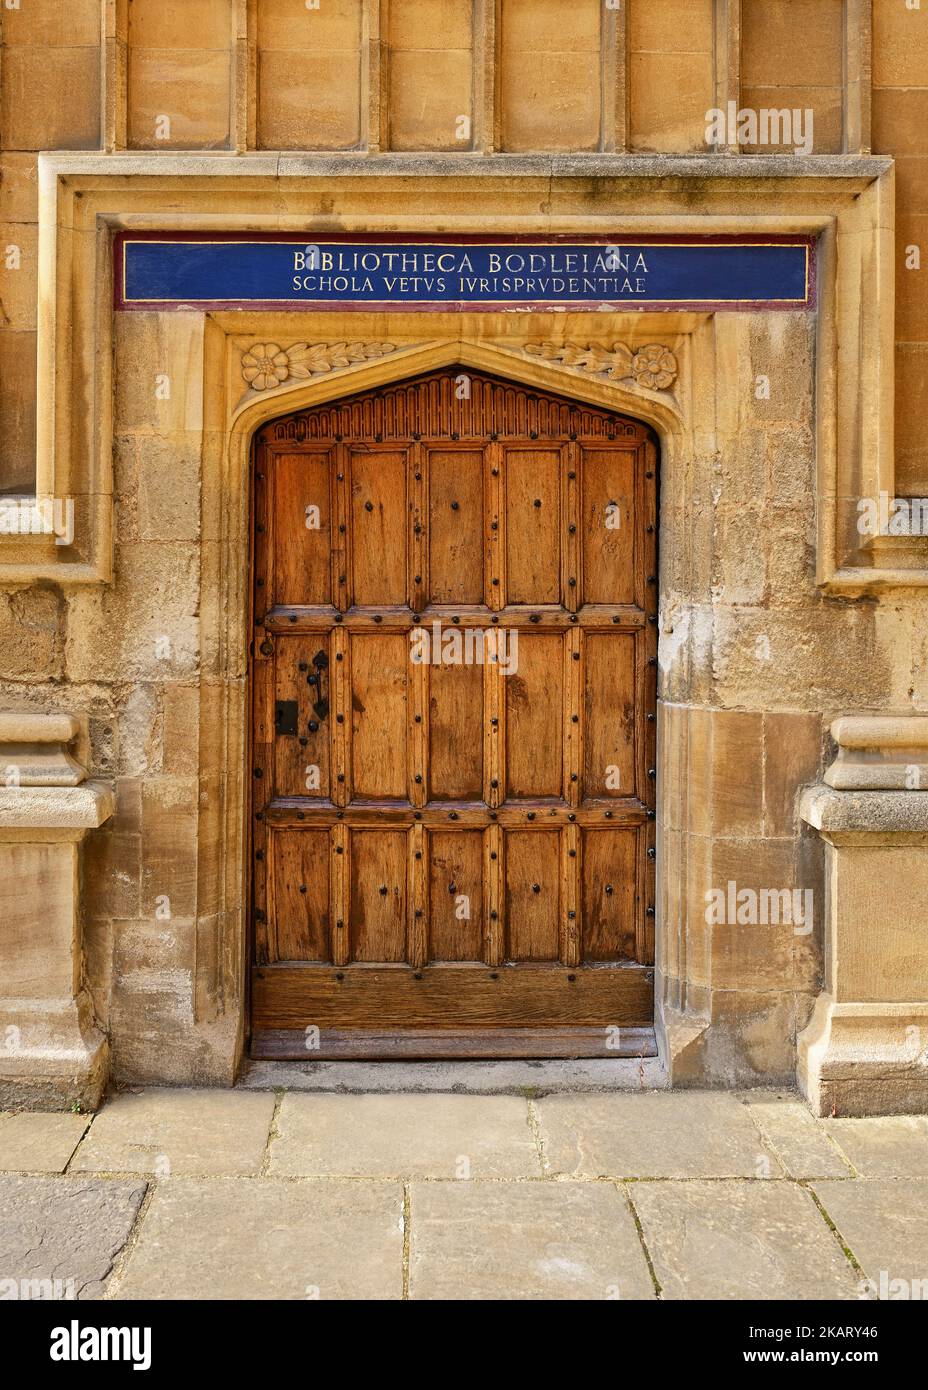 Doorway to the Schola Vetvs Ivrisprvdentiae in the Quadrangle of the Bodleian Library, Oxford University, Oxford, United Kingdom Stock Photo